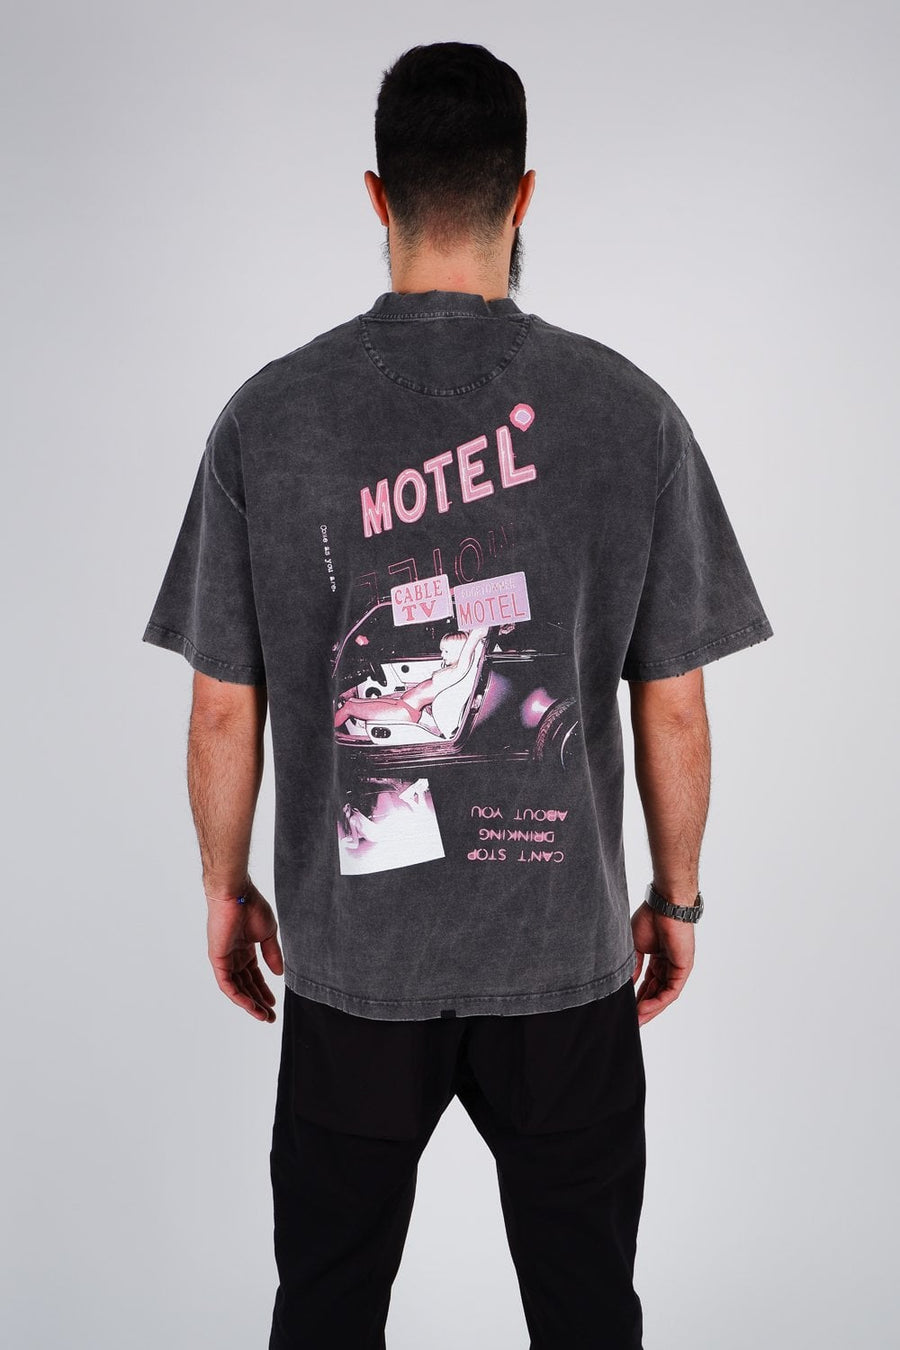 Buy the Off The Rails Motel T-Shirt in Vintage Black at Intro. Spend £50 for free UK delivery. Official stockists. We ship worldwide.